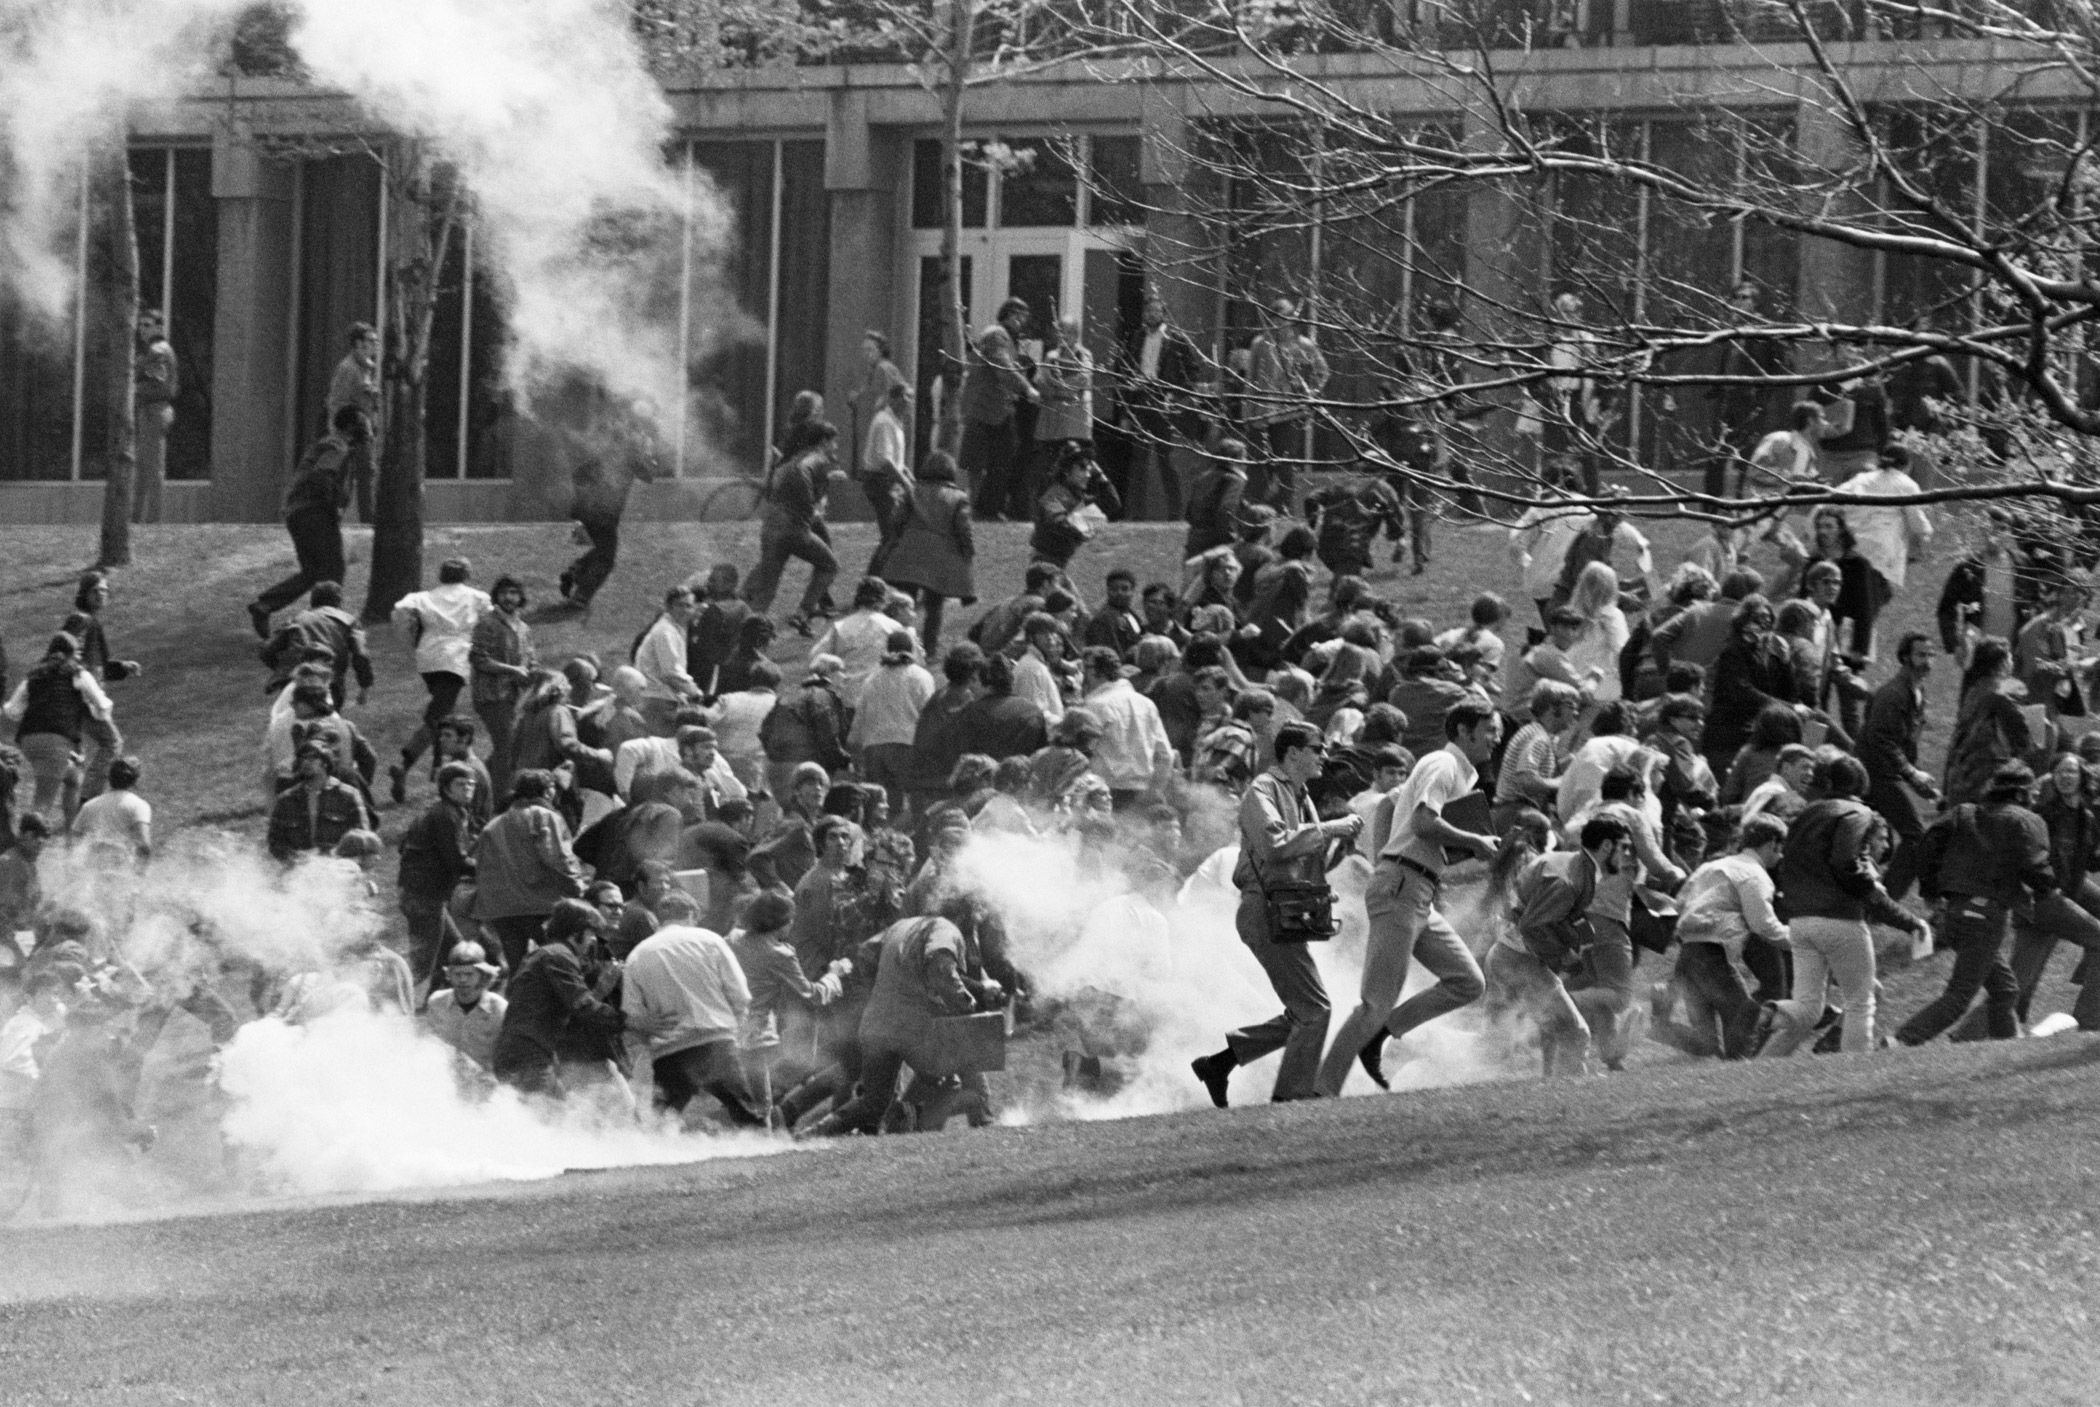 Kent State University students, including anti-war demonstrators, flee as National Guardsmen fire tear gas and bullets into the crowd on May 7, 1970 in Kent, Ohiot. The guardsmen killed four students and wounded nine others.